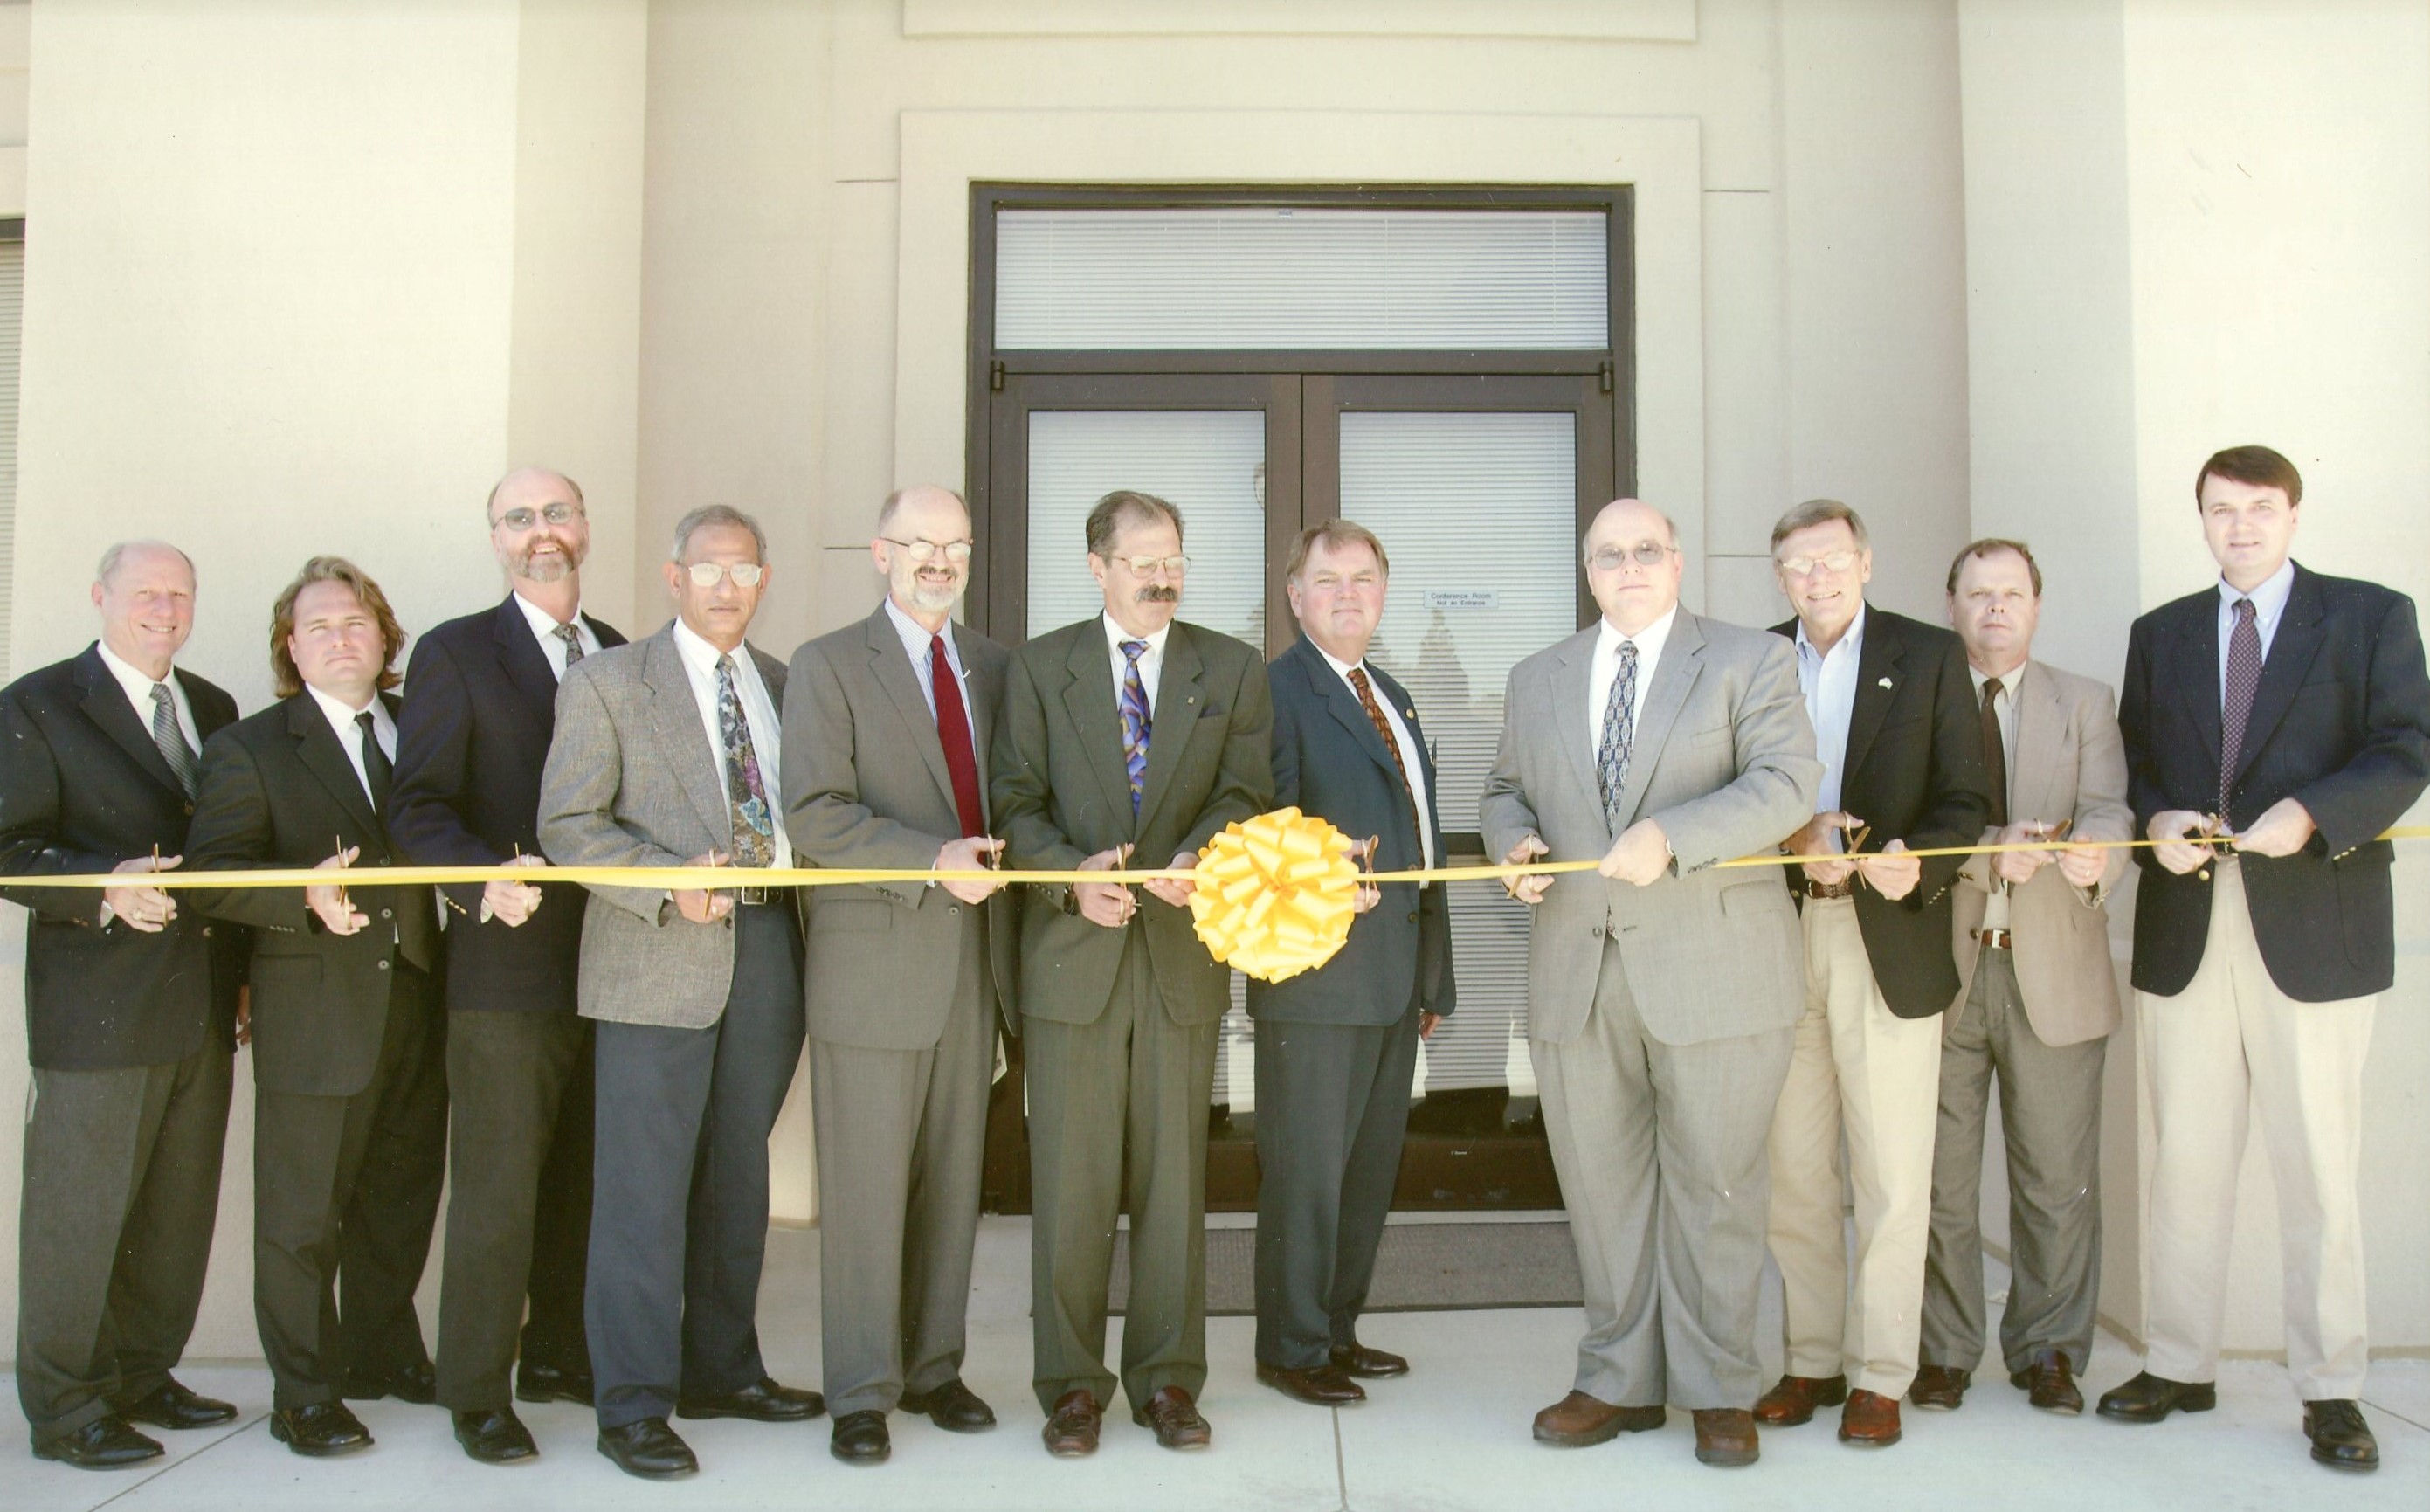 a group of people poised to cut a large yellow ribbon in front of a building